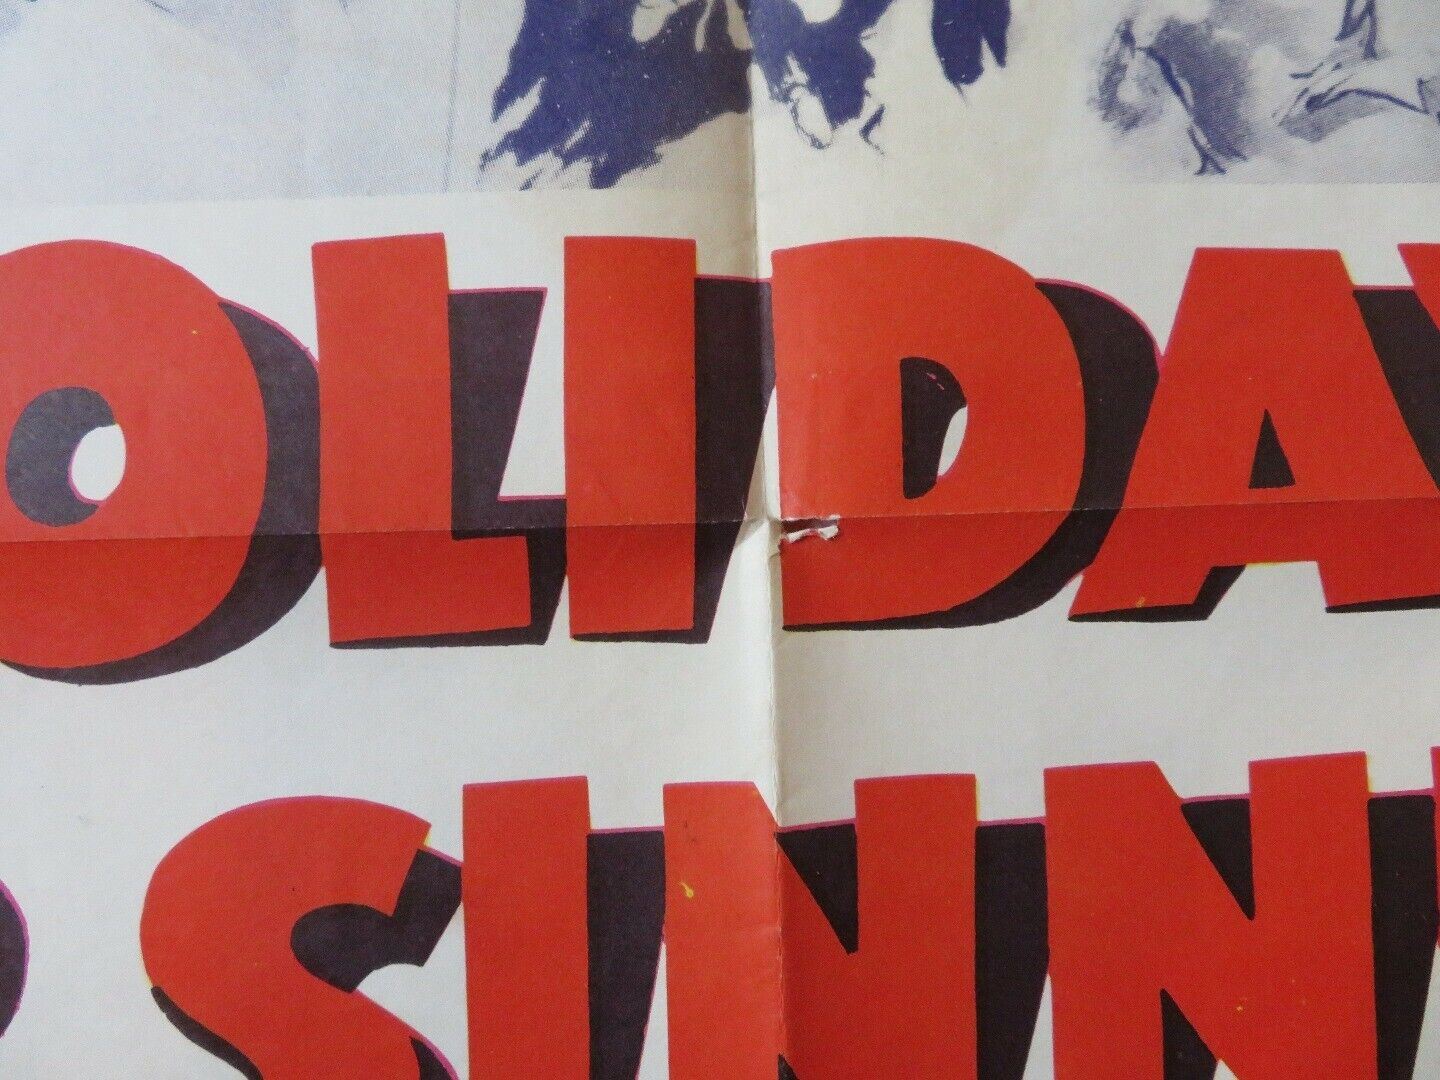 HOLIDAY FOR SINNERS  FOLDED US ONE SHEET POSTER GIG YOUNG KEENAN WYNN 1952